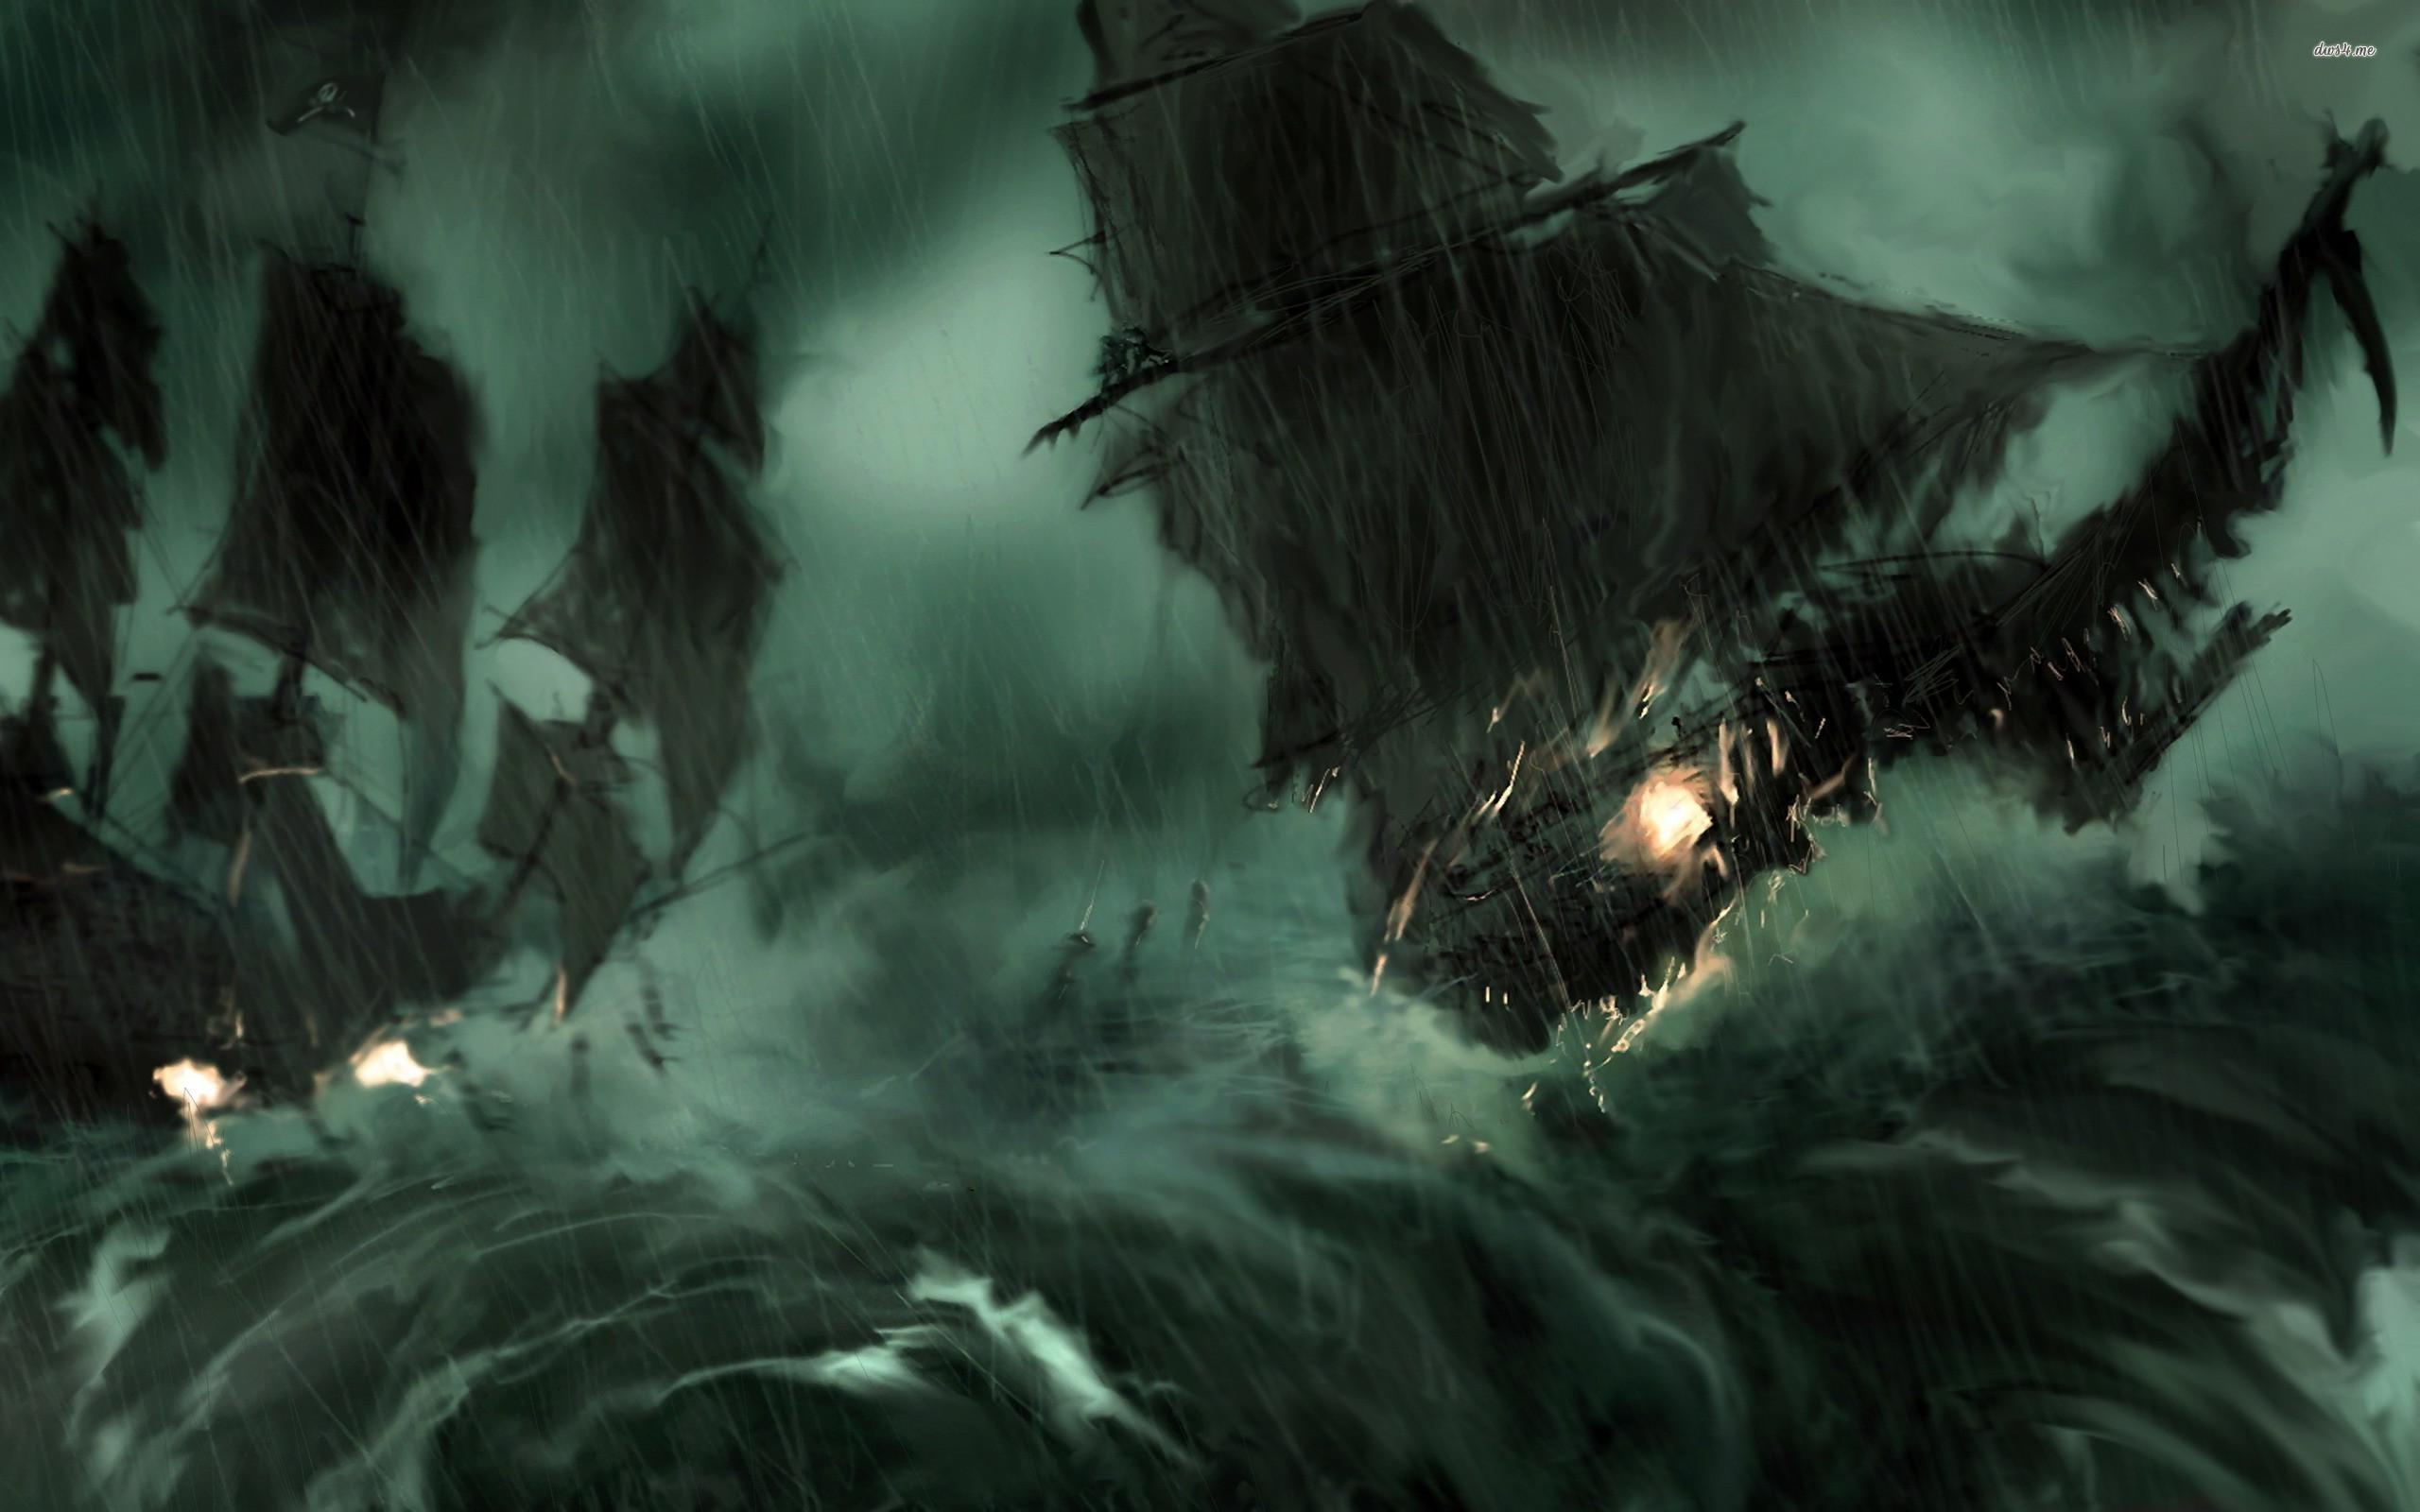 Pirate ship during the storm wallpaper wallpaper